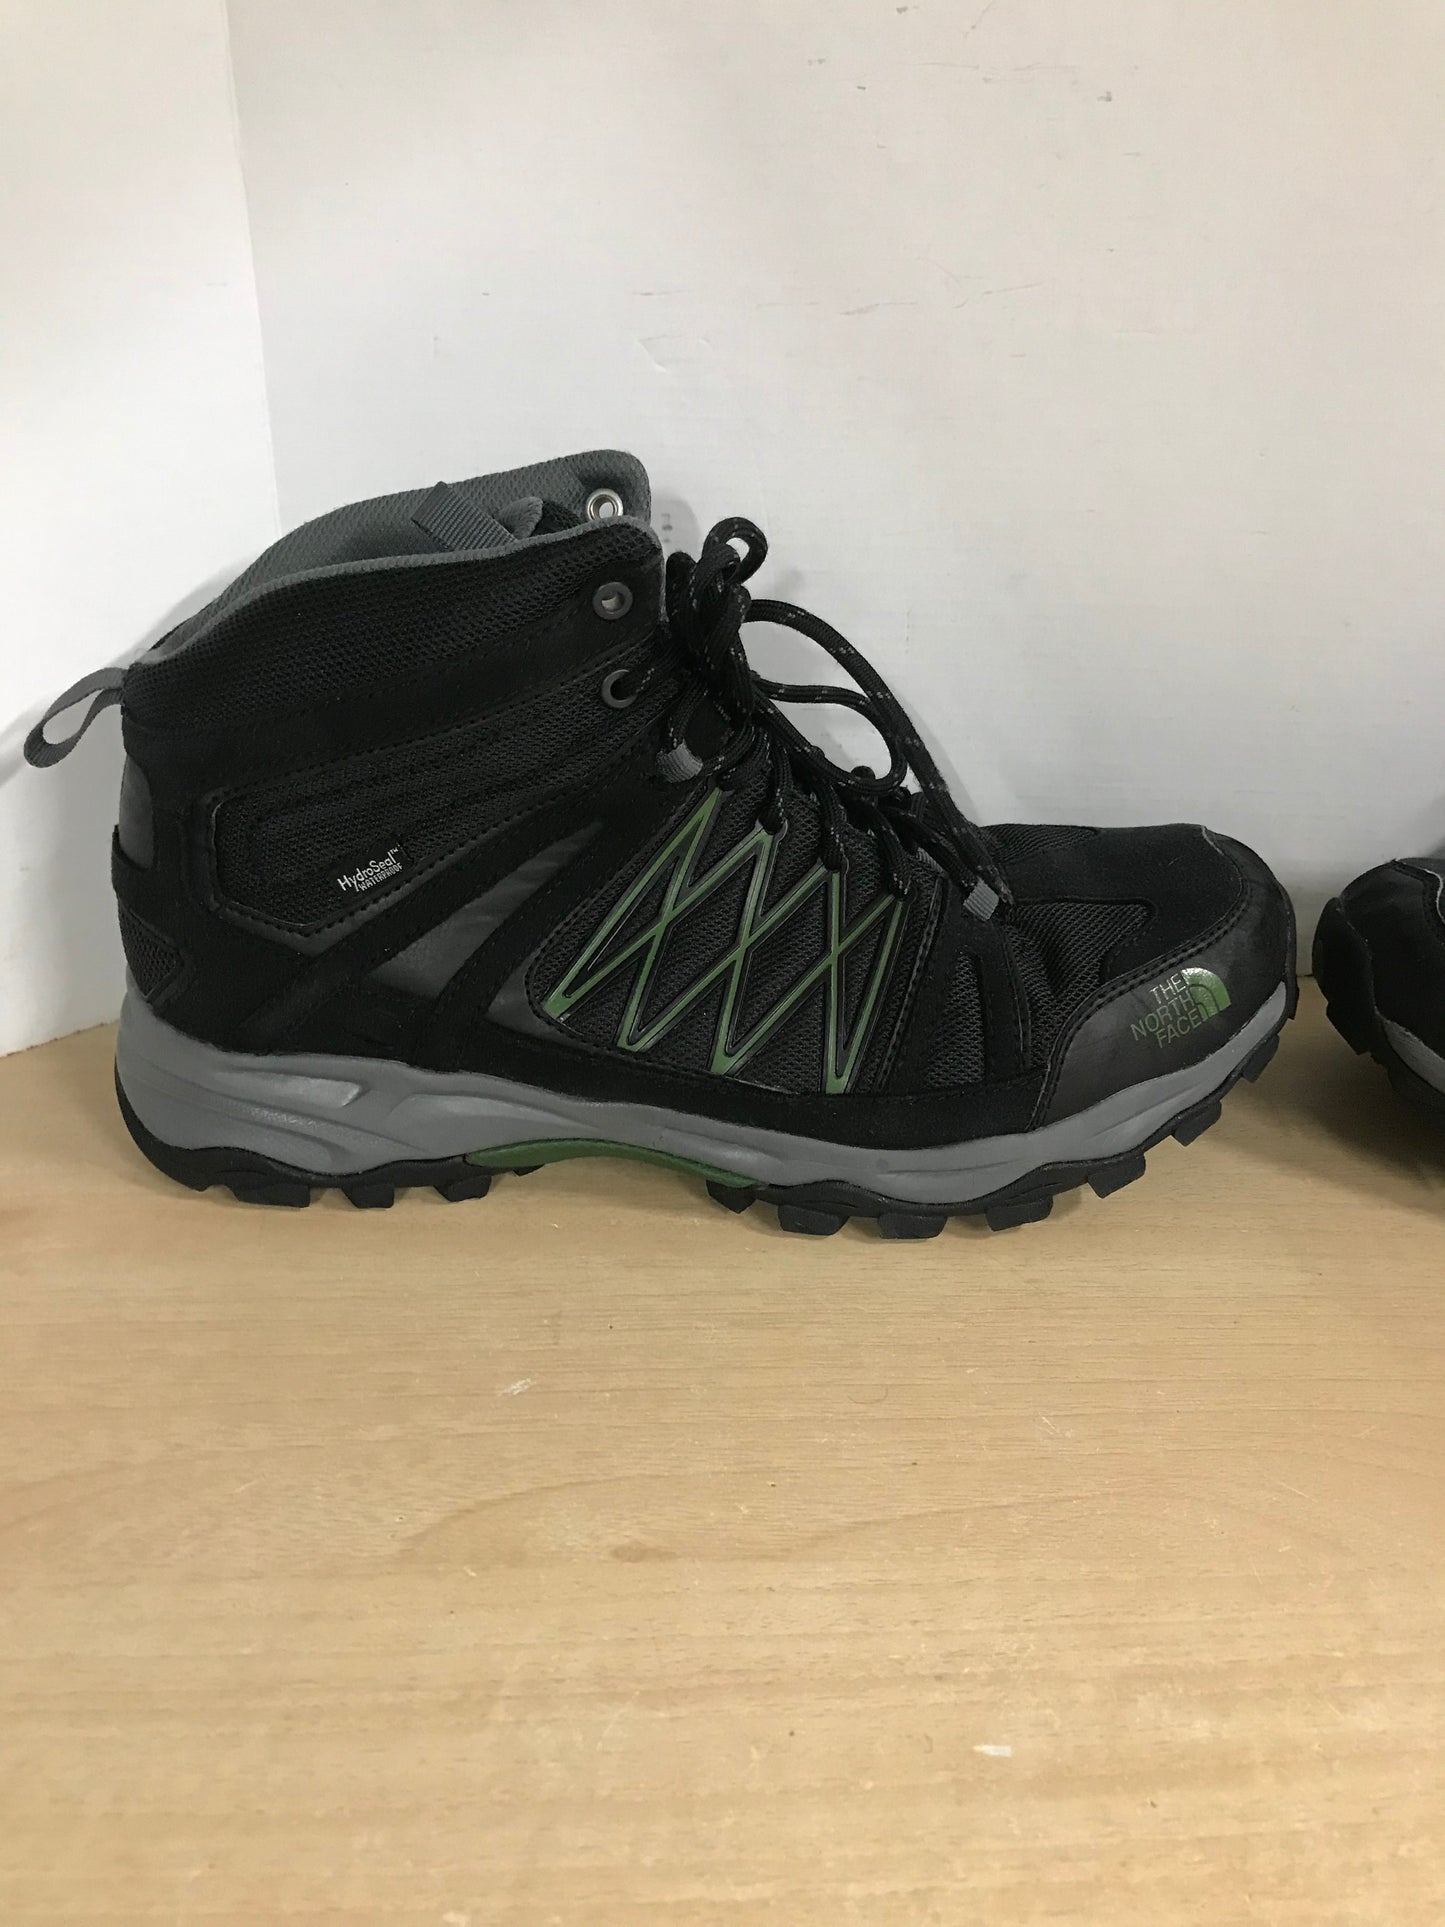 Hiking Boots Men's Size 9 The North Face Black Grey Green Waterproof Excellent As New